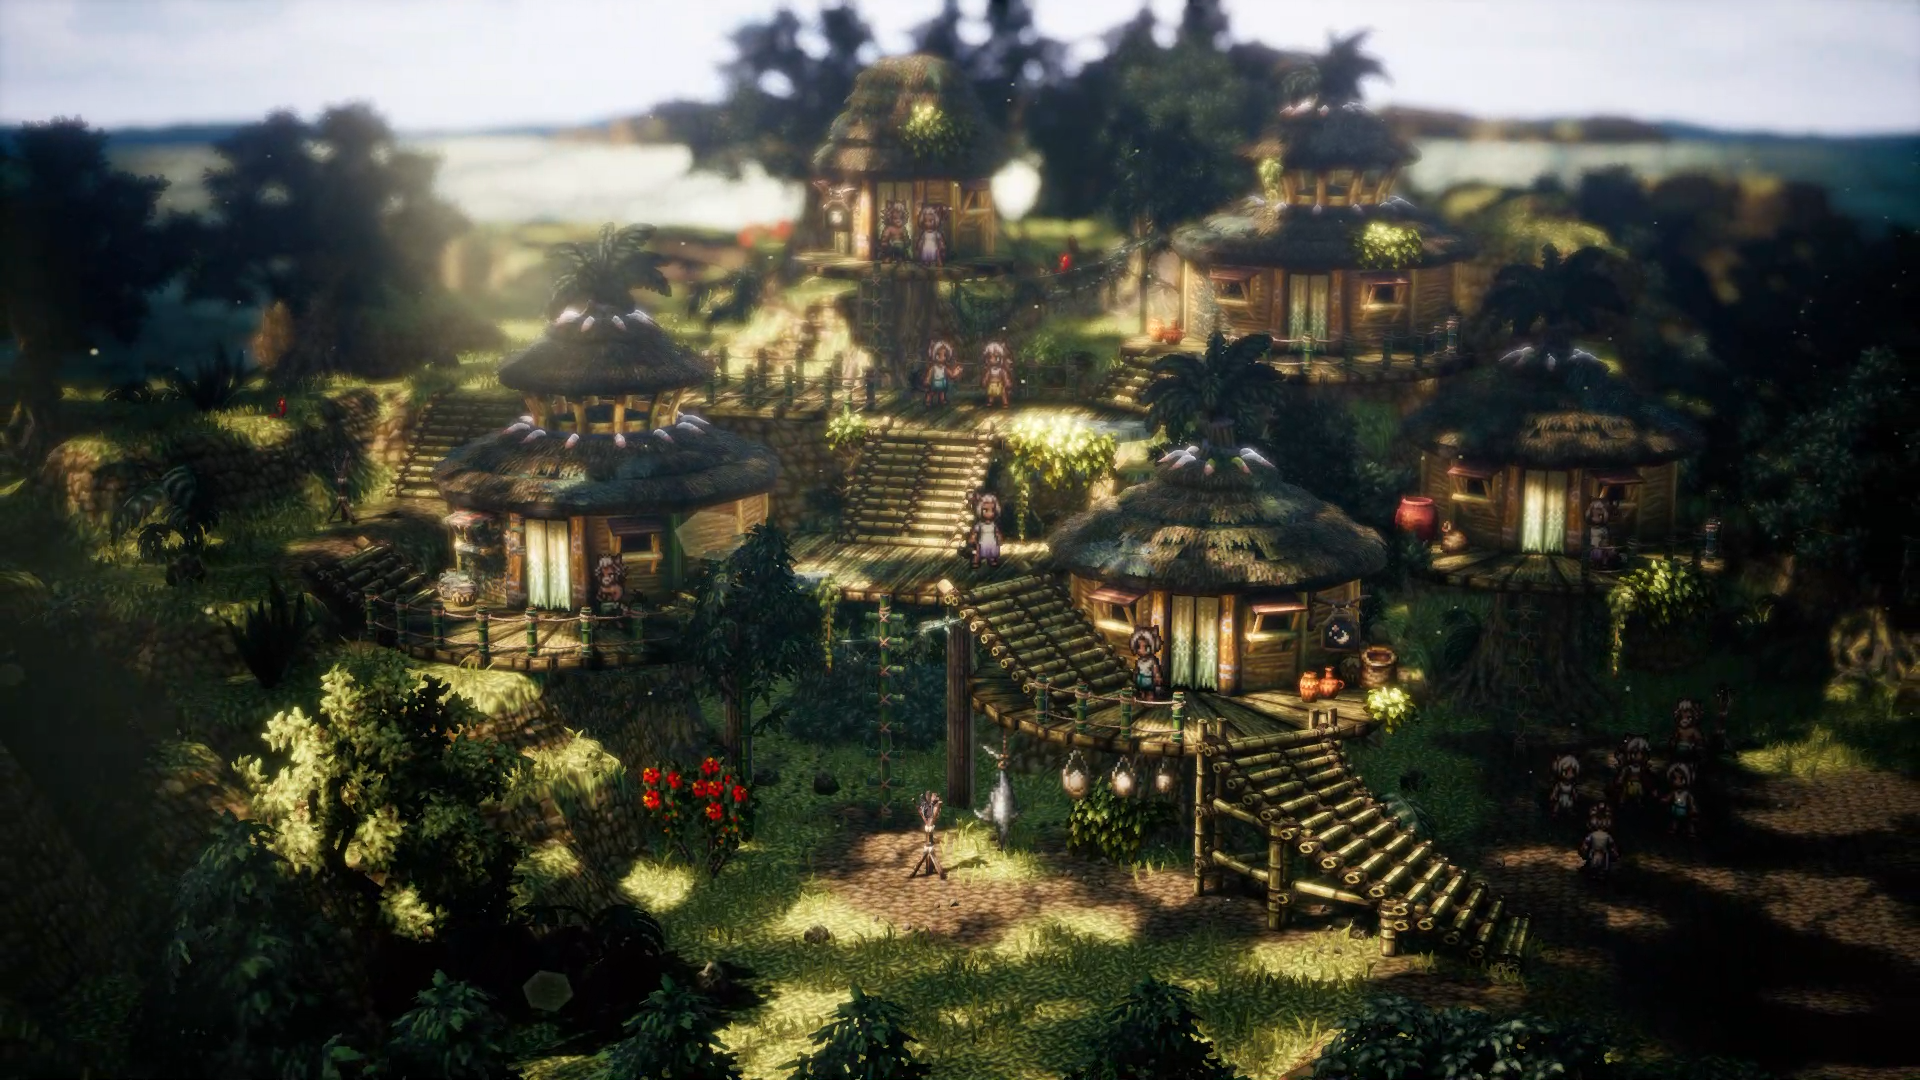 New Octopath Traveler II Trailer Introduces Ochette’s & Castii’s Settings & Gameplay Toolkits; Side Stories, Screenshots